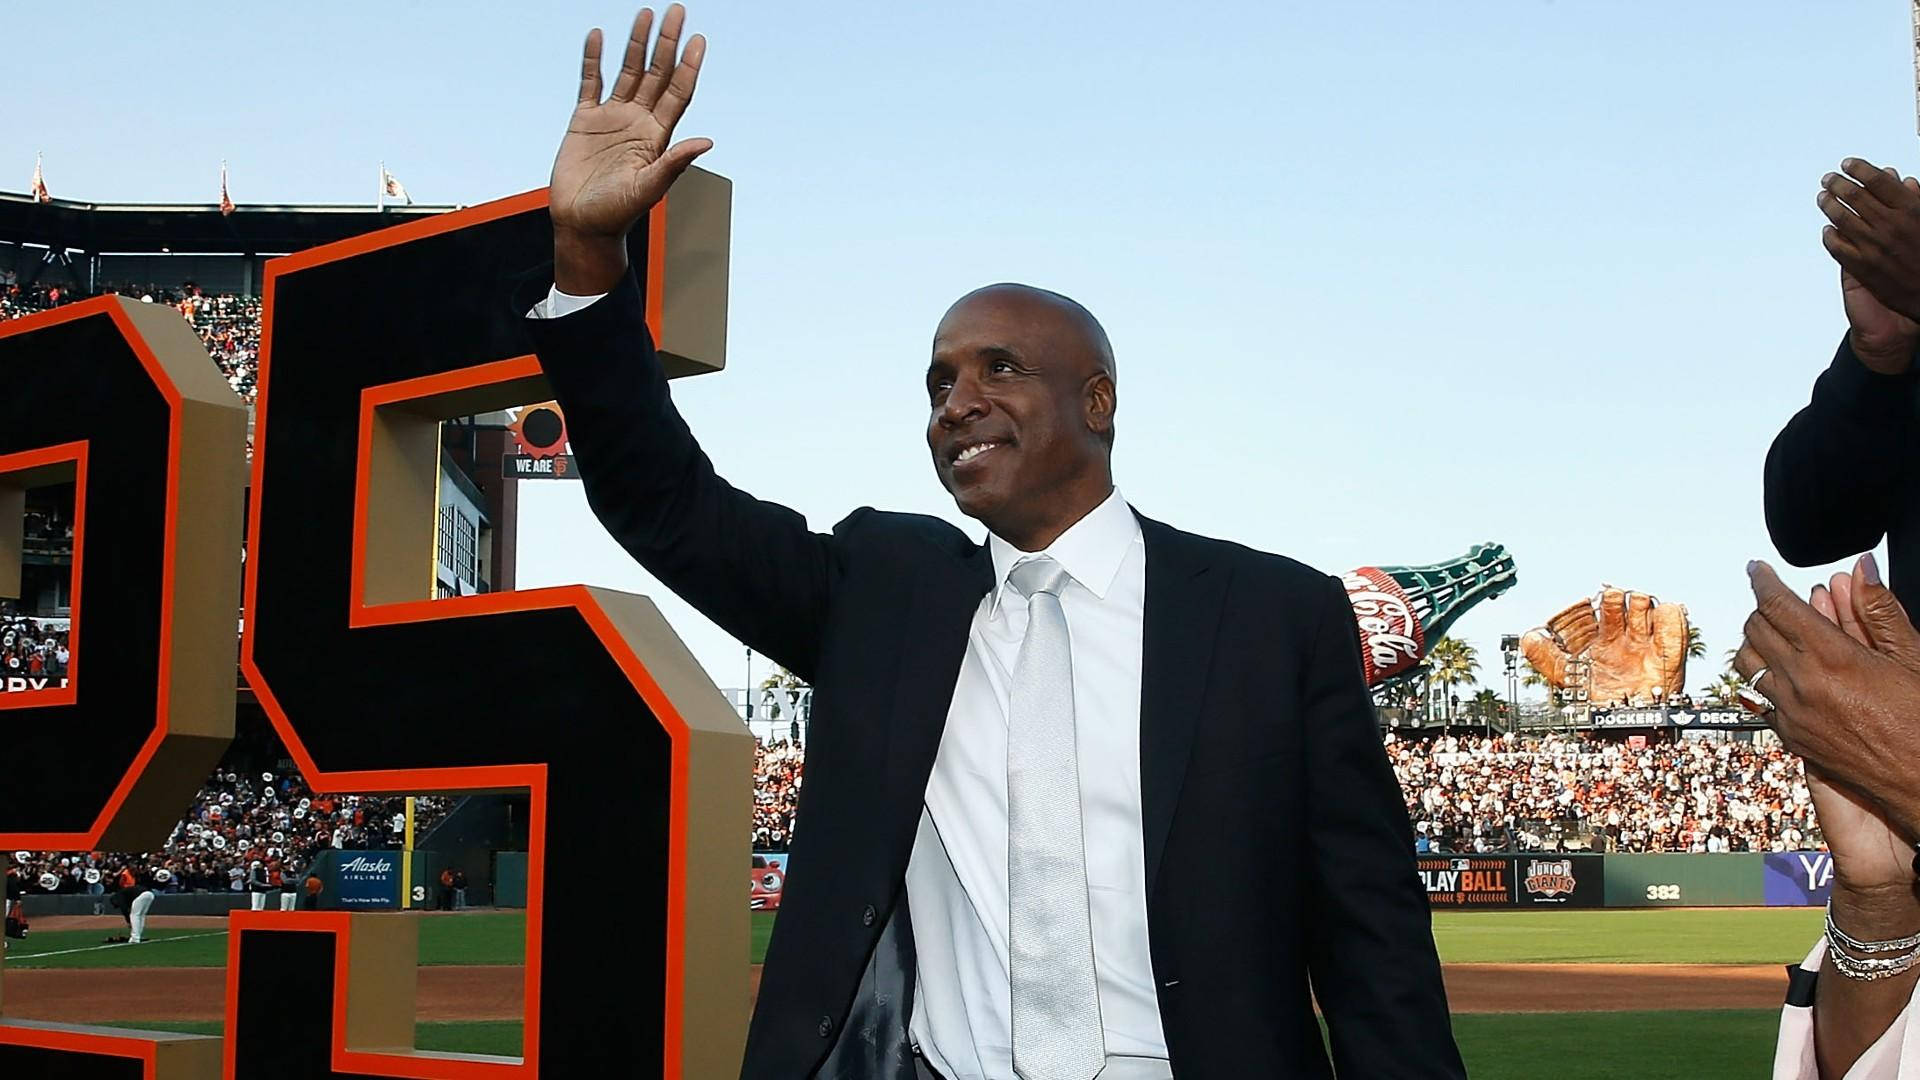 Barry Bonds Greets Audience